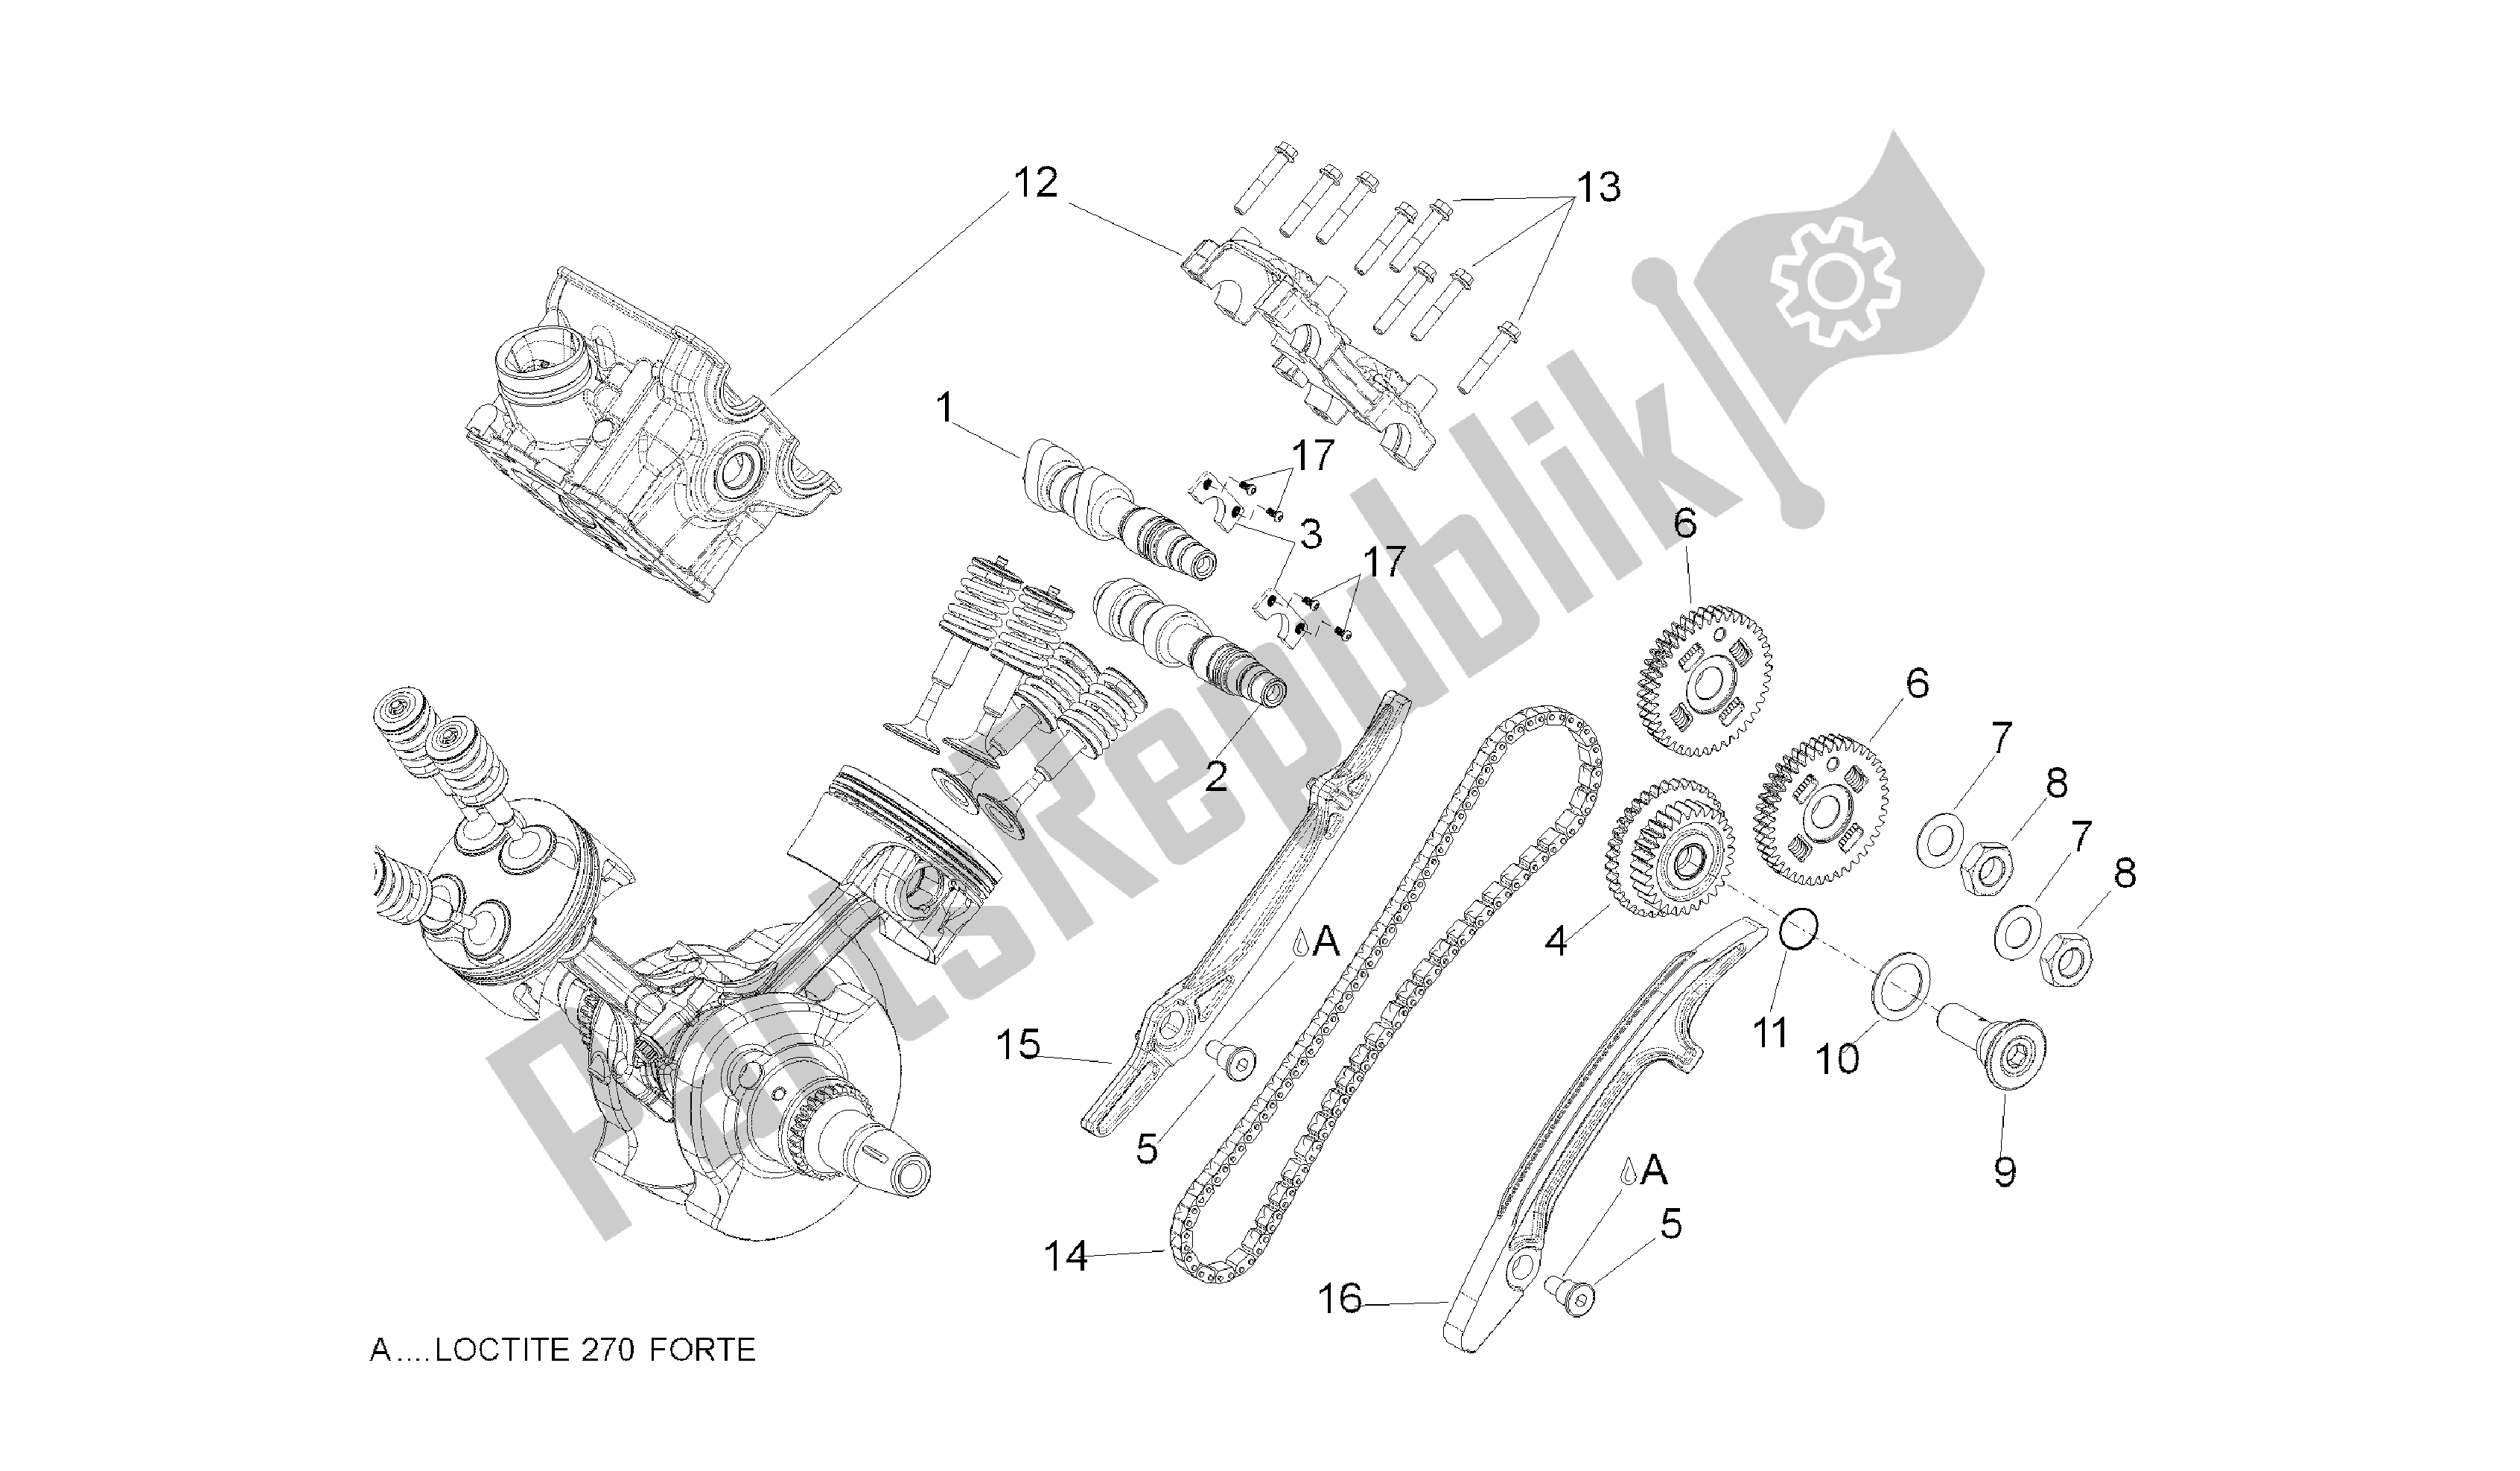 All parts for the Rear Cylinder Timing System of the Aprilia Shiver 750 2010 - 2013